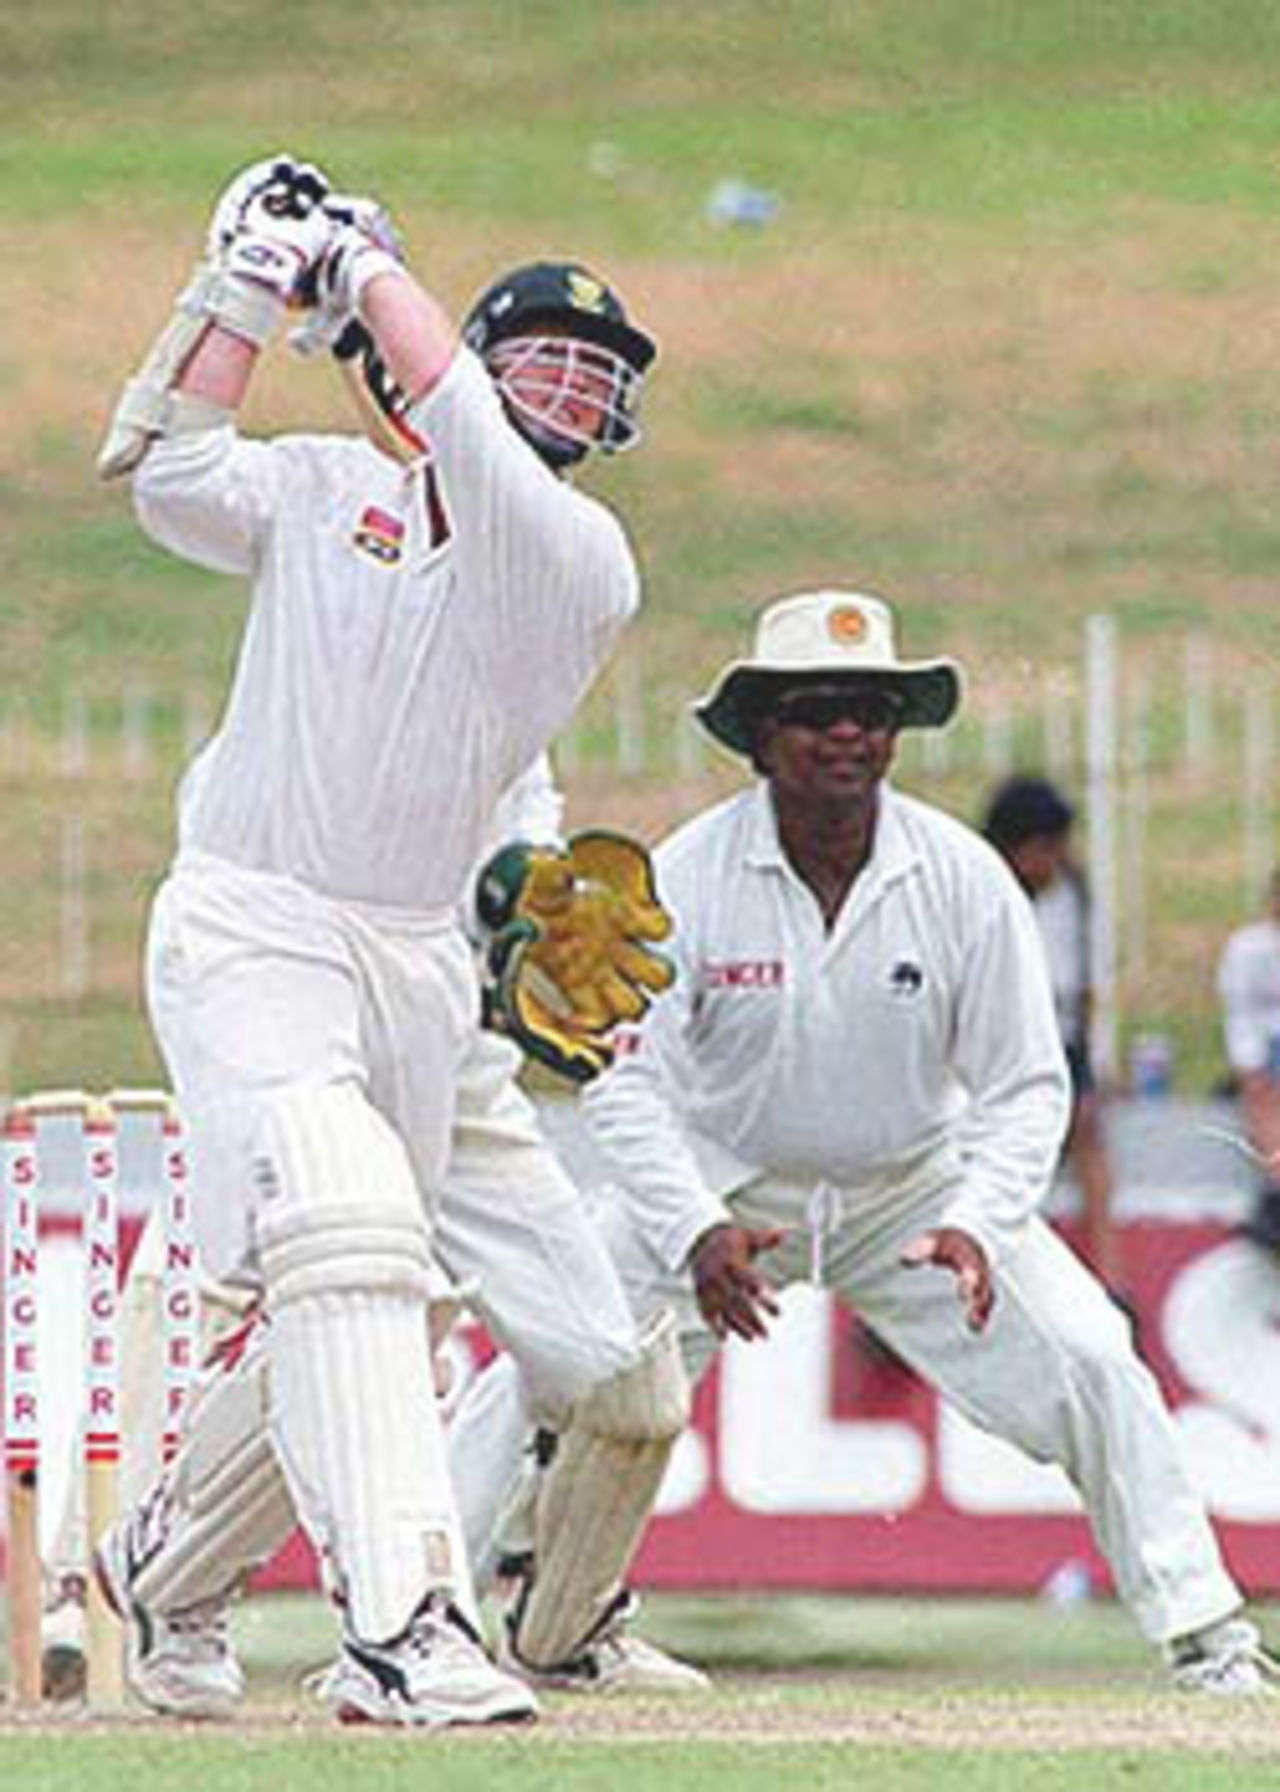 Ranatunga watches on as Klusener smashes the ball to the offside boundary, South Africa in Sri Lanka, 2000/01, 3rd Test, Sri Lanka v South Africa, Sinhalese Sports Club Ground, Colombo, 06-10 August 2000 (Day 1).